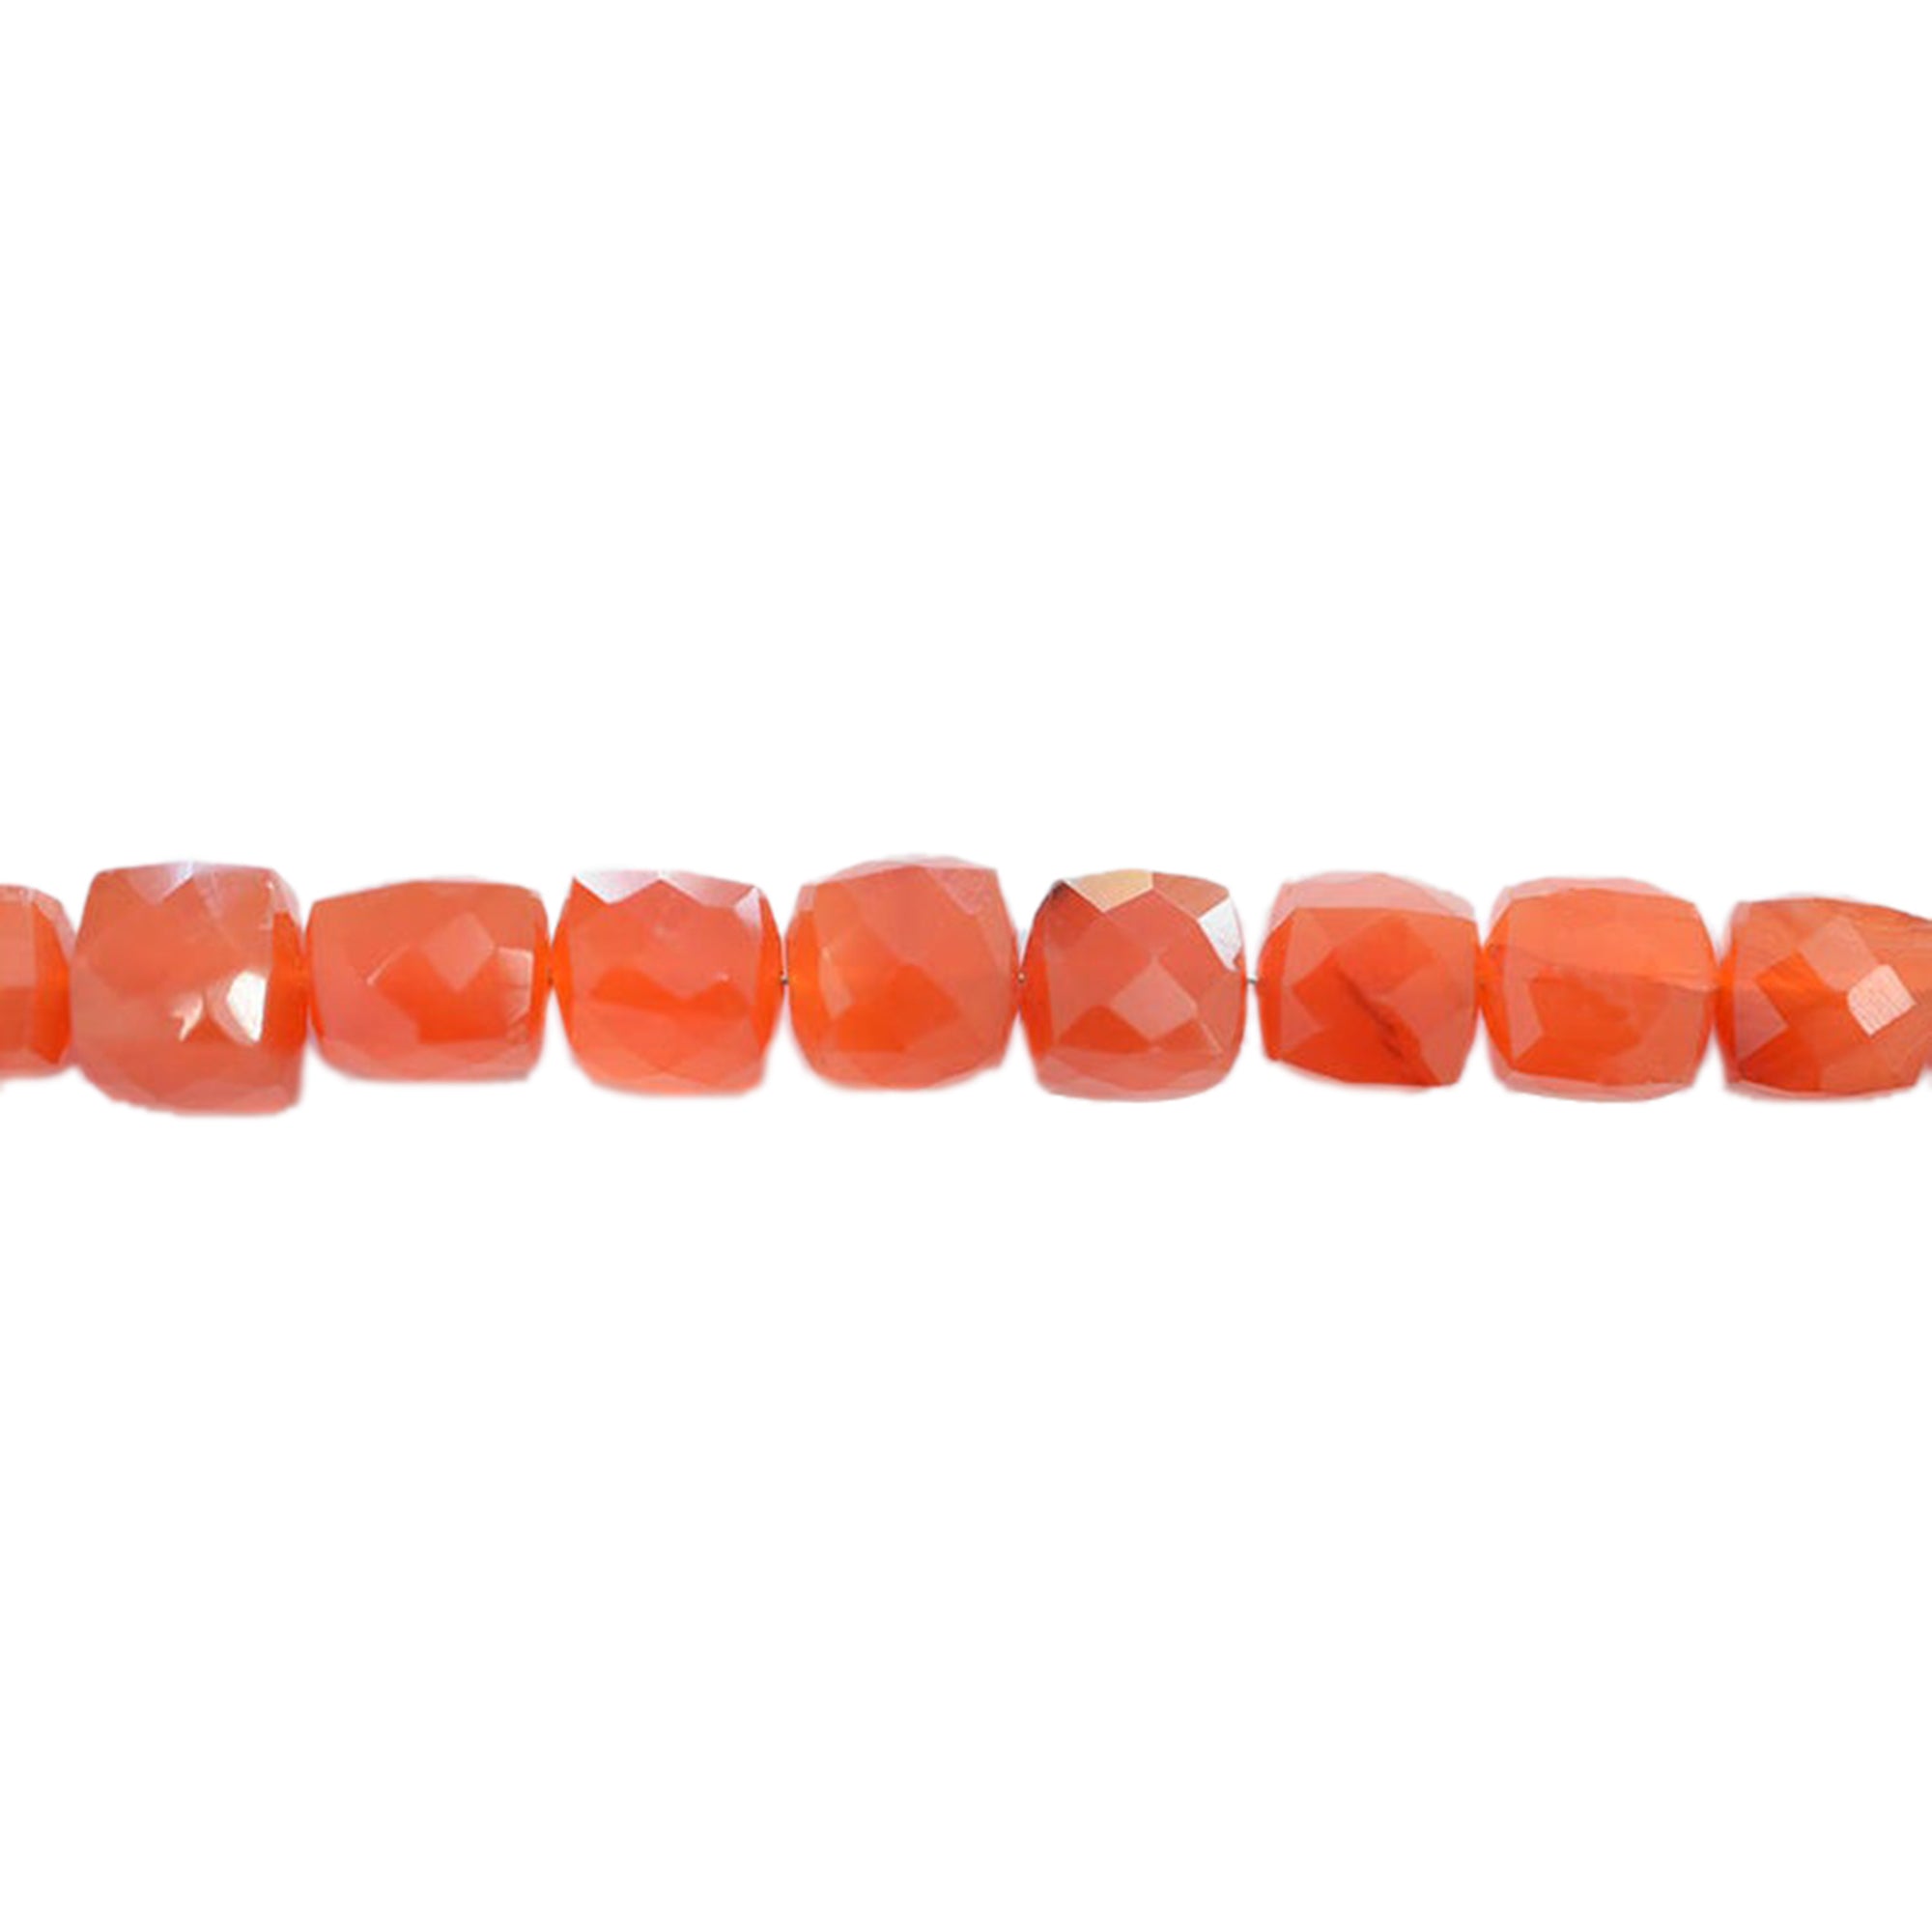 Red Onyx 6 To 7 MM Faceted Cube Shape Beads Strand